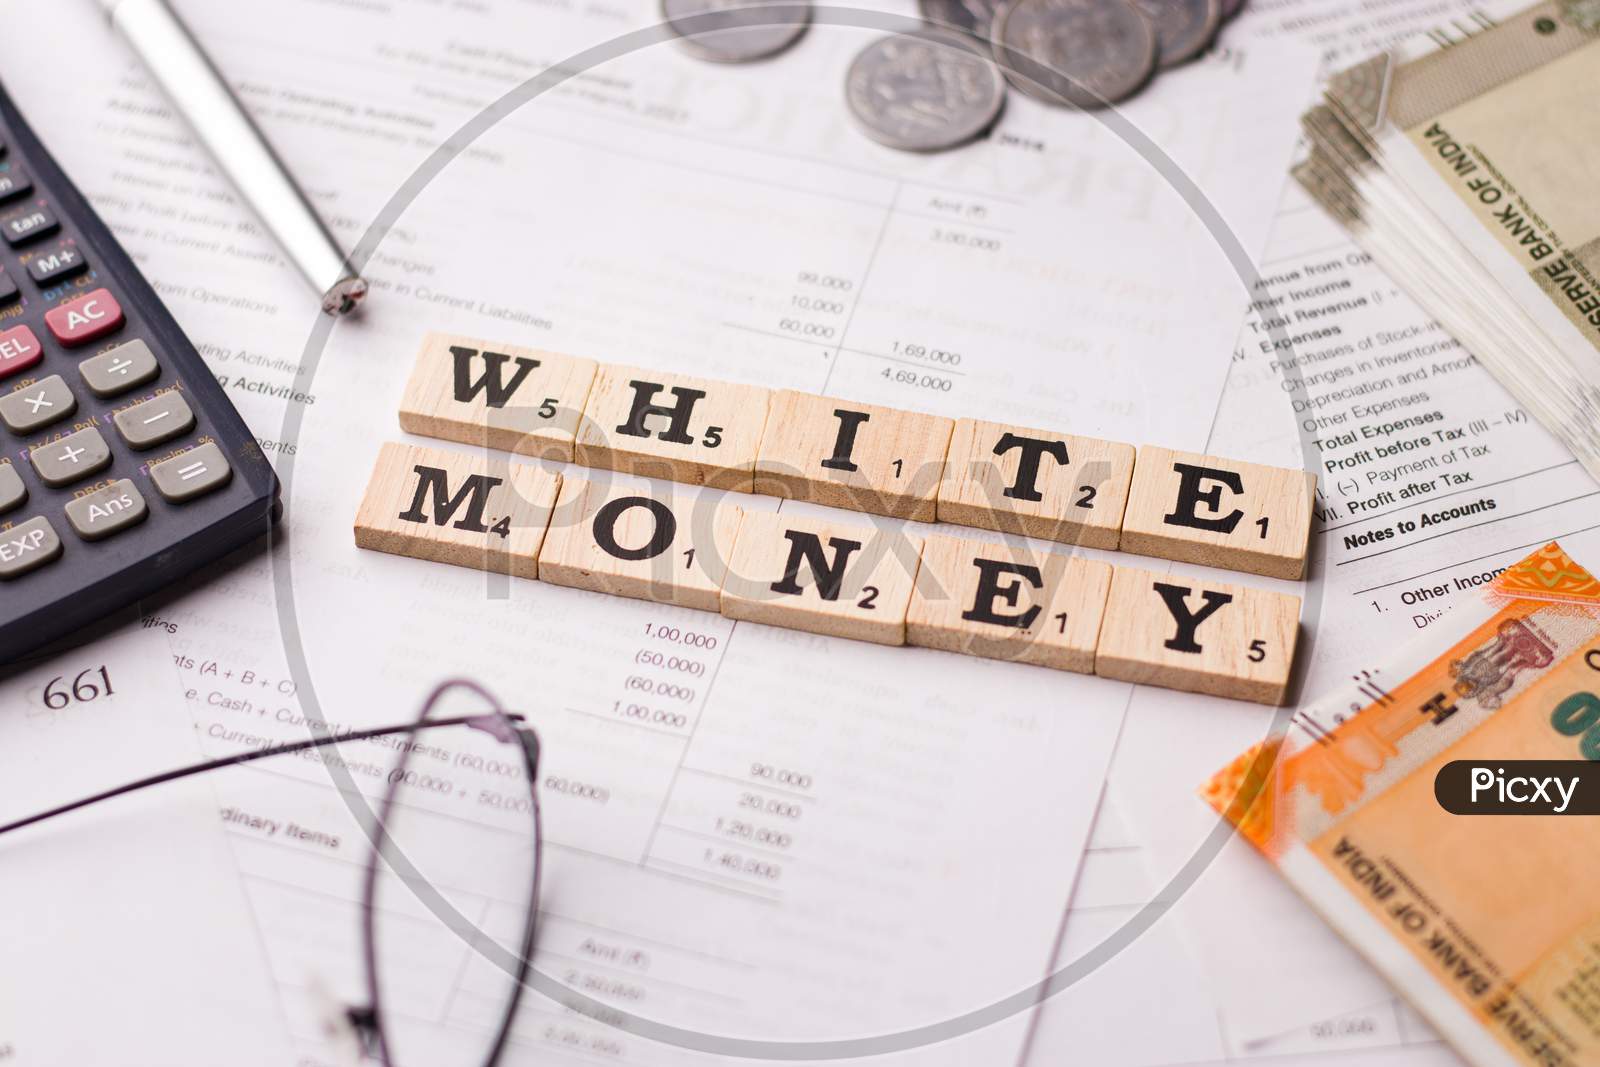 Assam, india - March 30, 2021 : Word WHITE MONEY written on wooden cubes stock image.